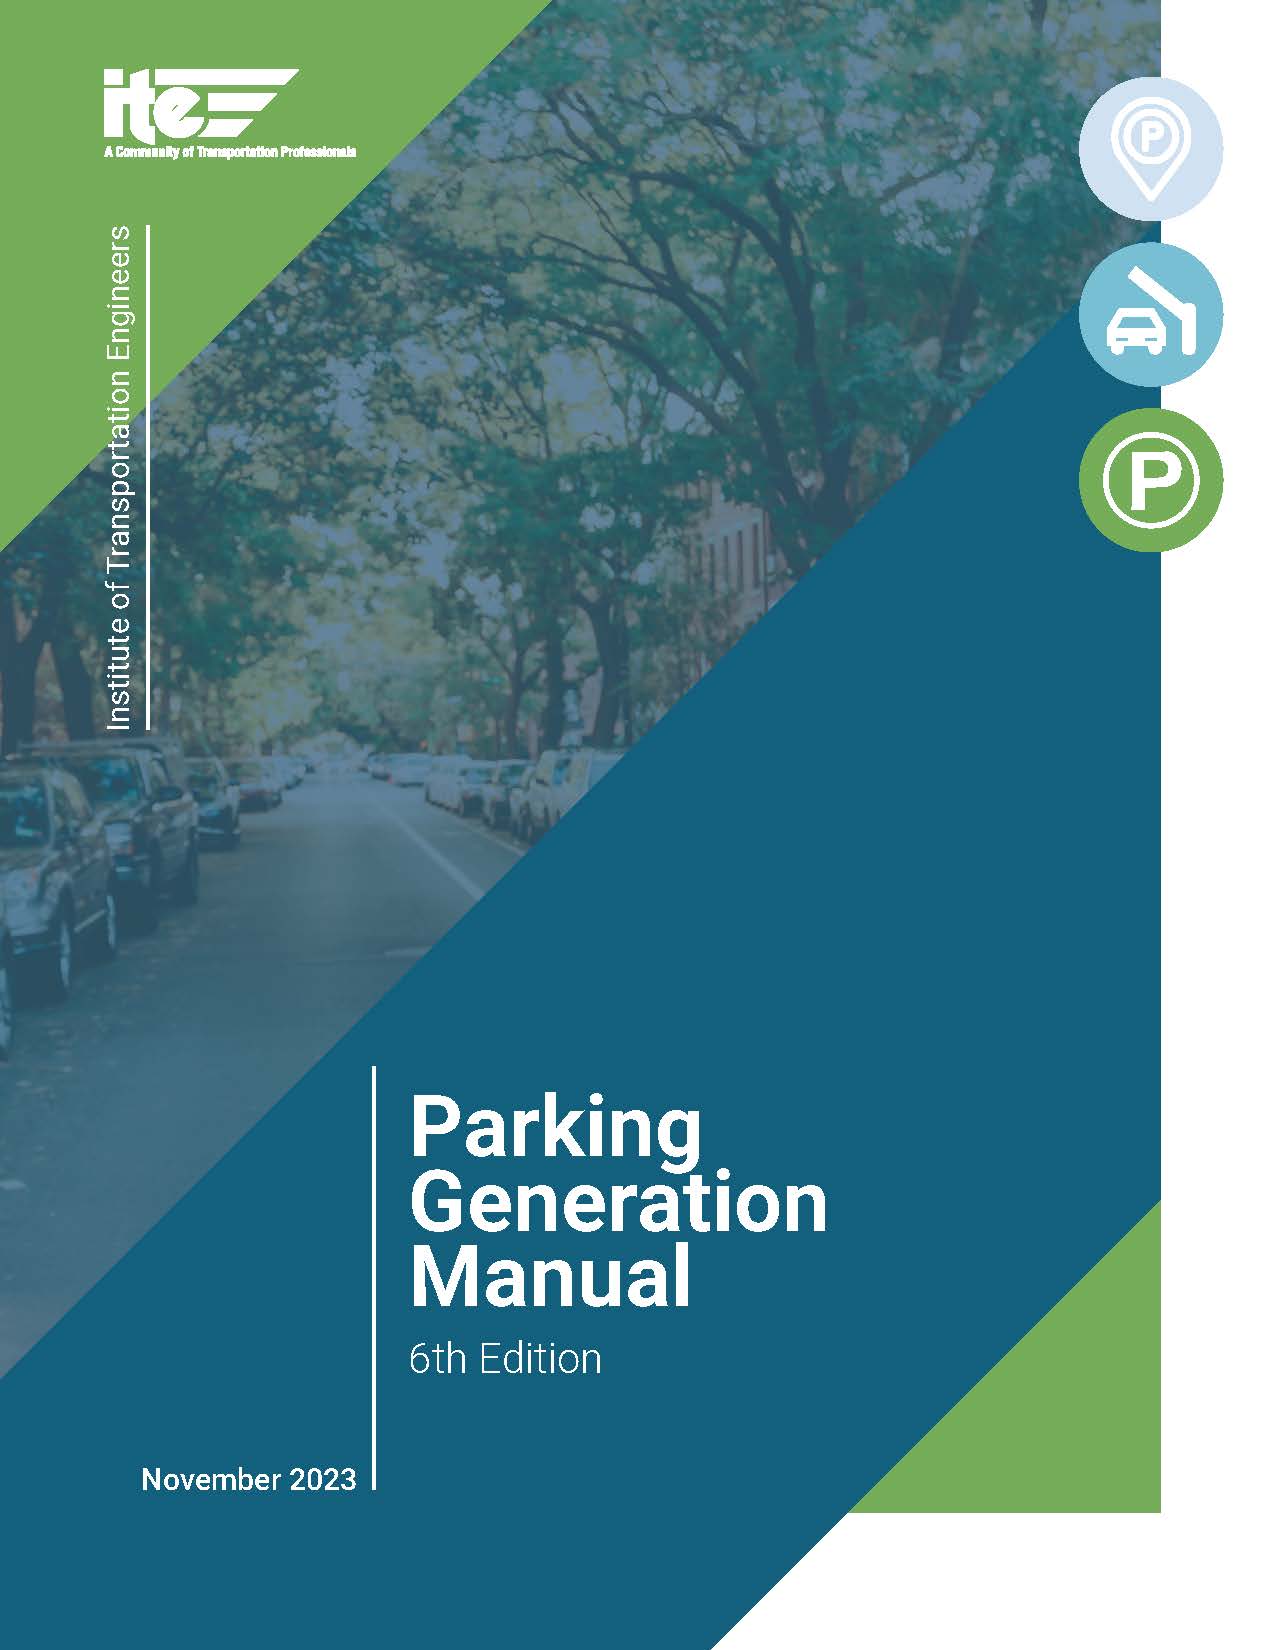 ParkGen6 - All in One Bundle: 1 License and 1 Print Edition